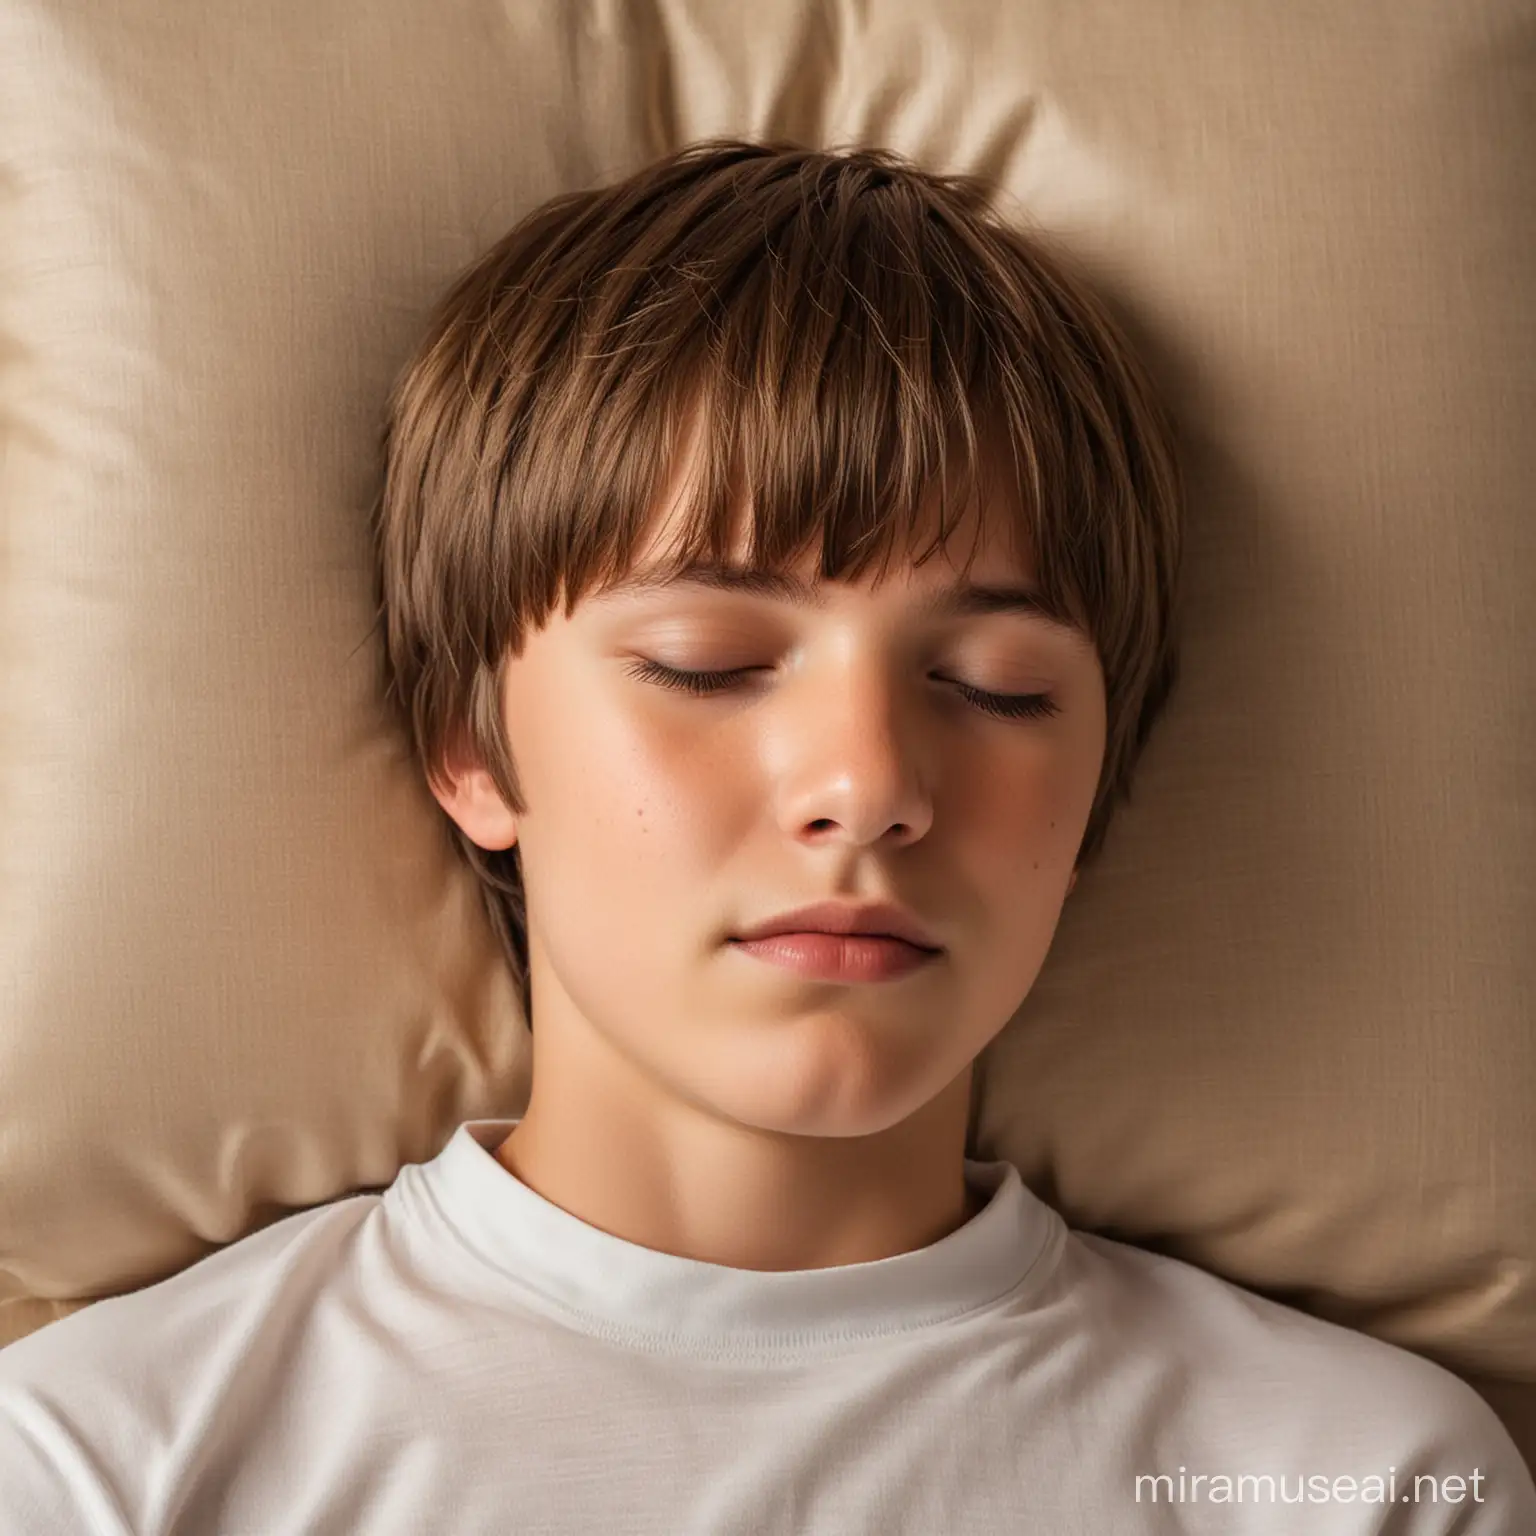 Peaceful TenYearOld Boy Sleeping on Soft Pillow with Light Brown Highlights